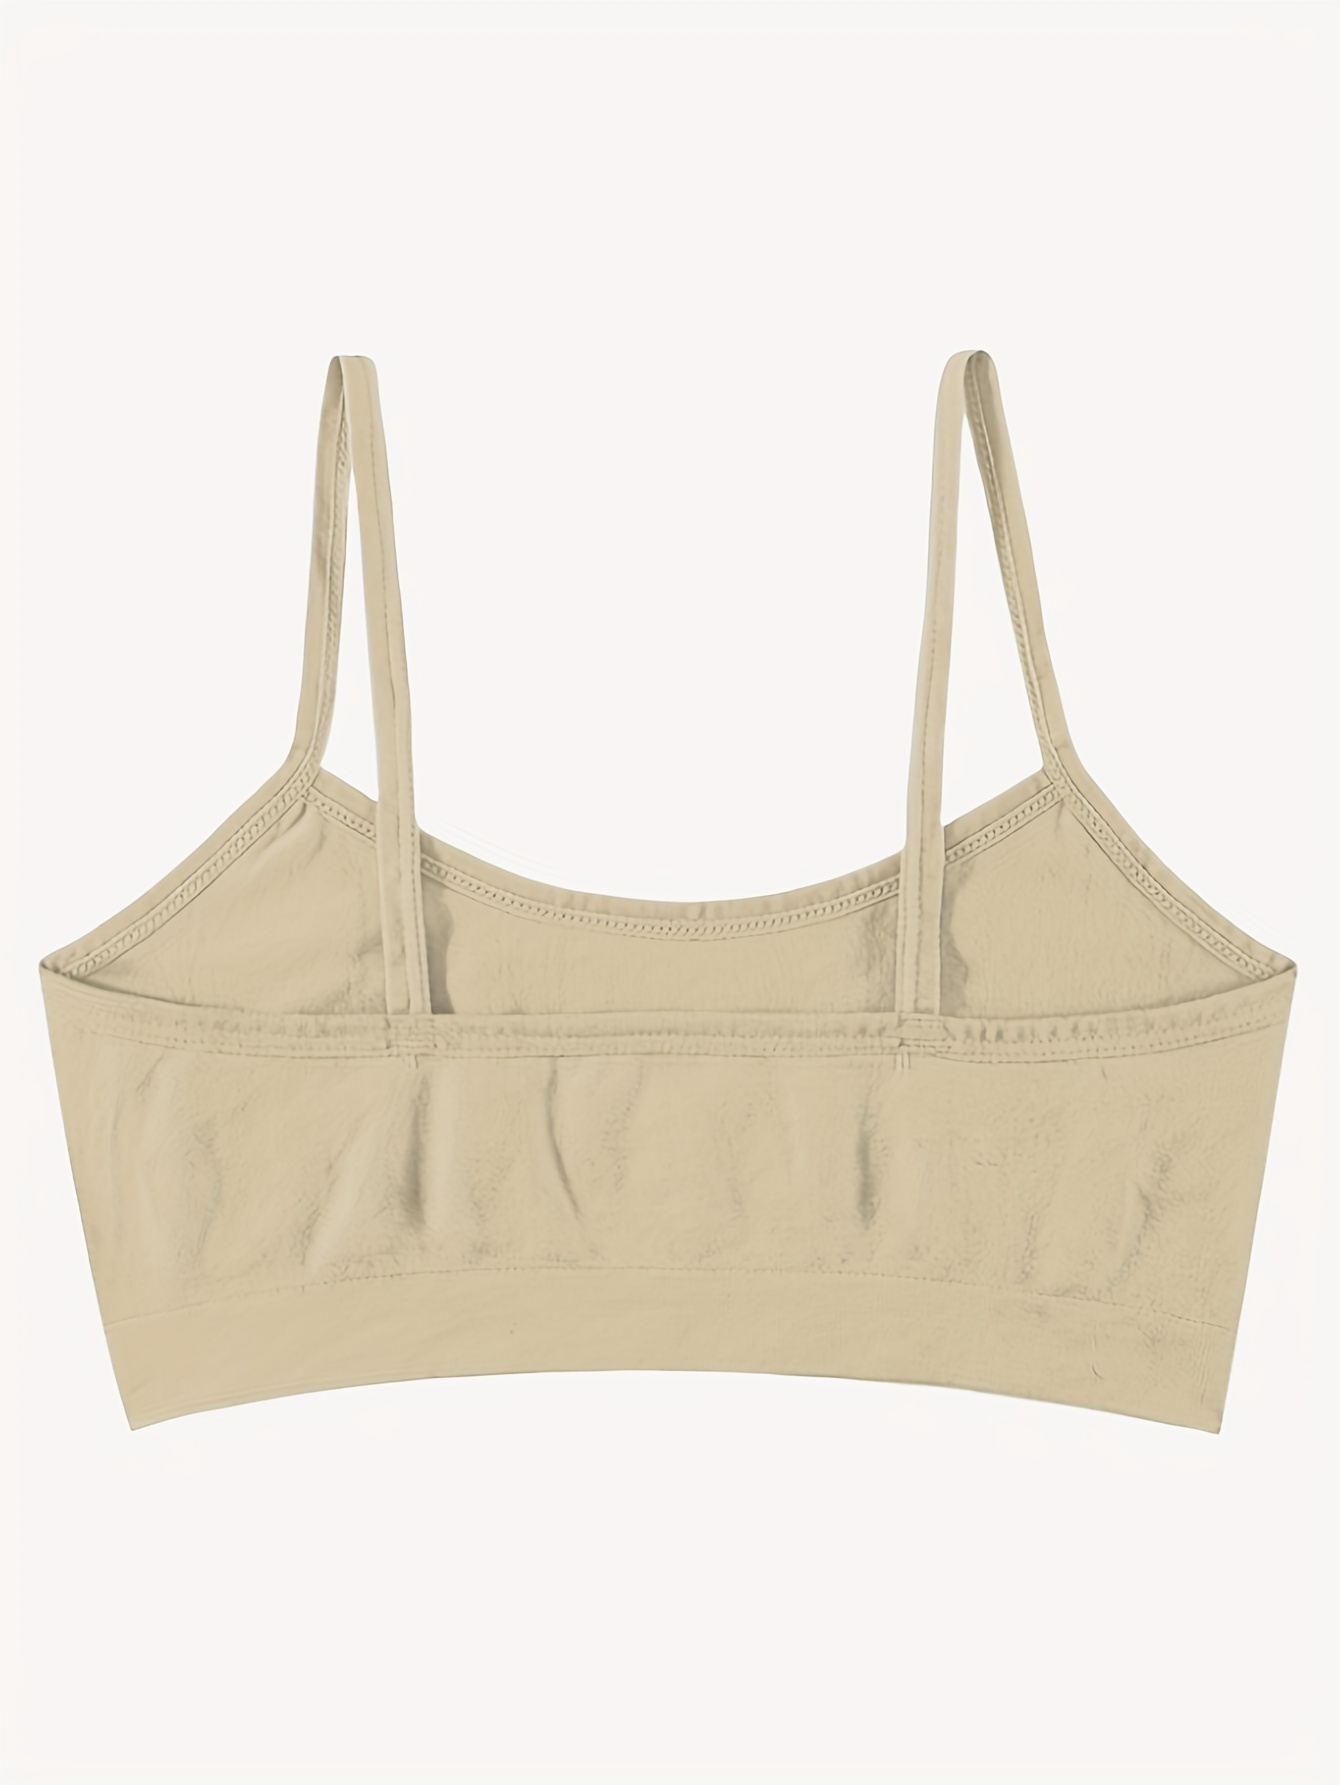 Buy Tweens Backless Lightly Padded Cotton Rich Bra, Seamless Molded